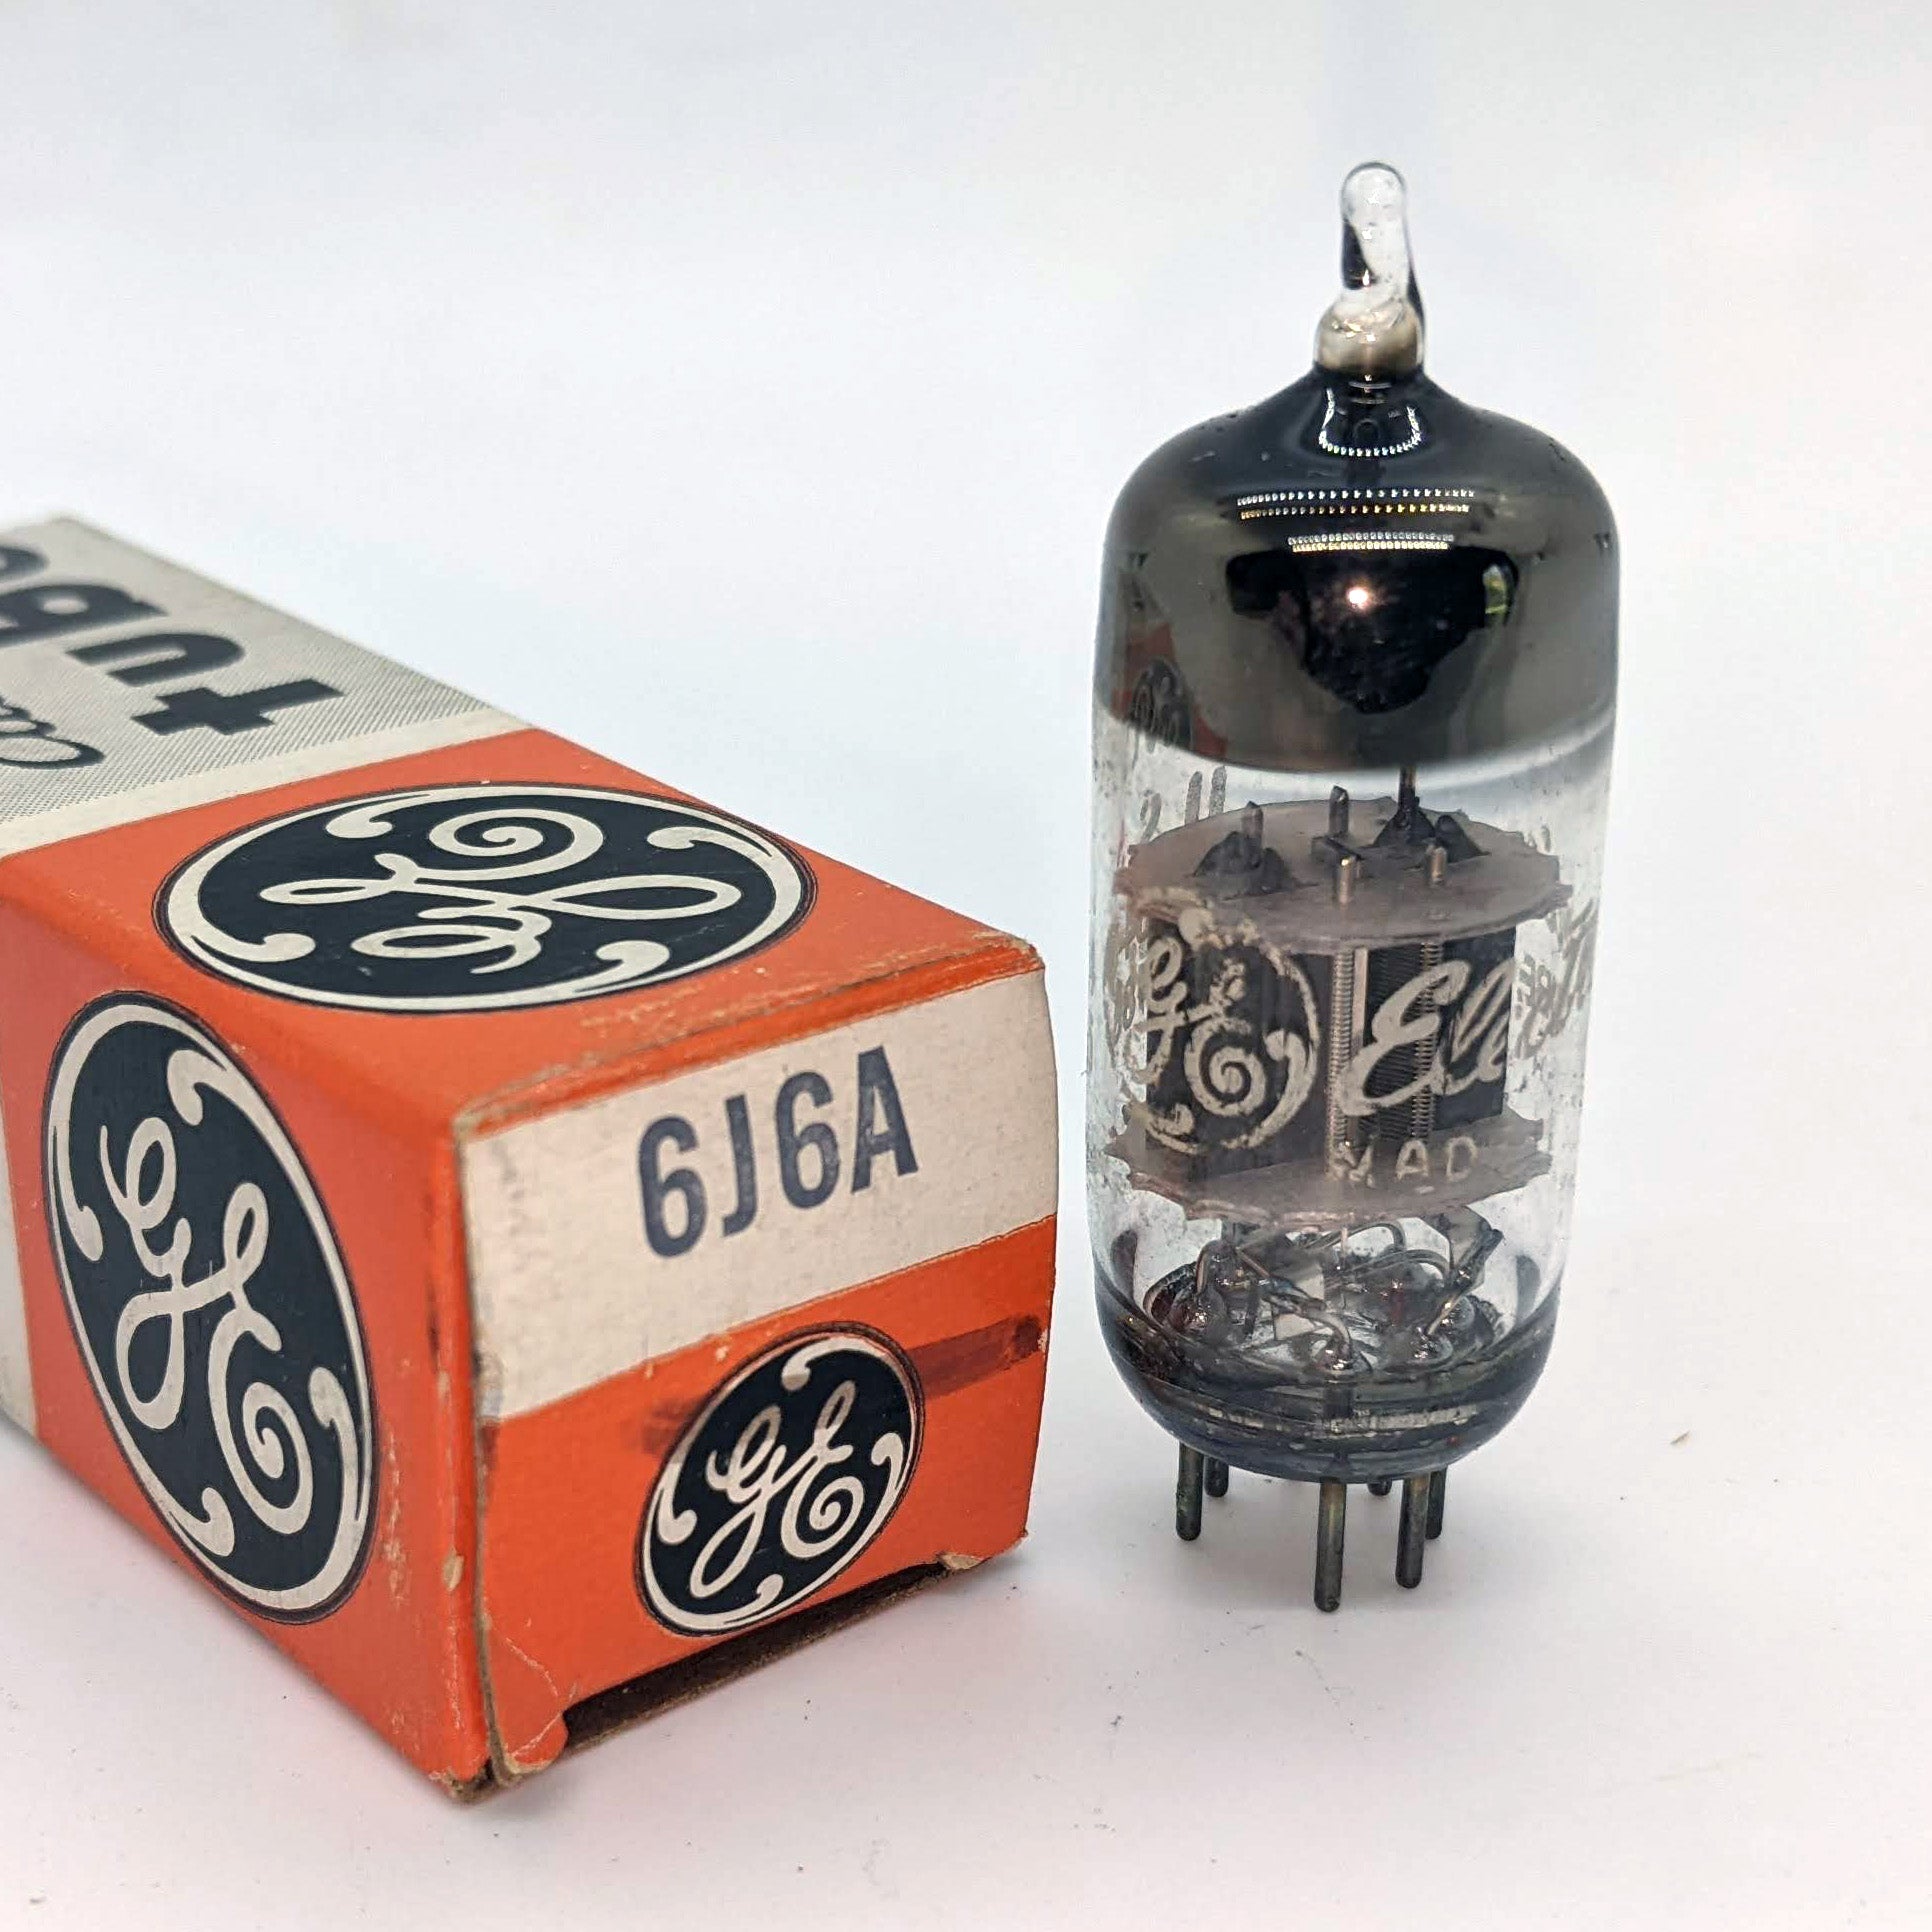 New GE 6J6A Tube, 1964, Tested Good On Hickok Tester